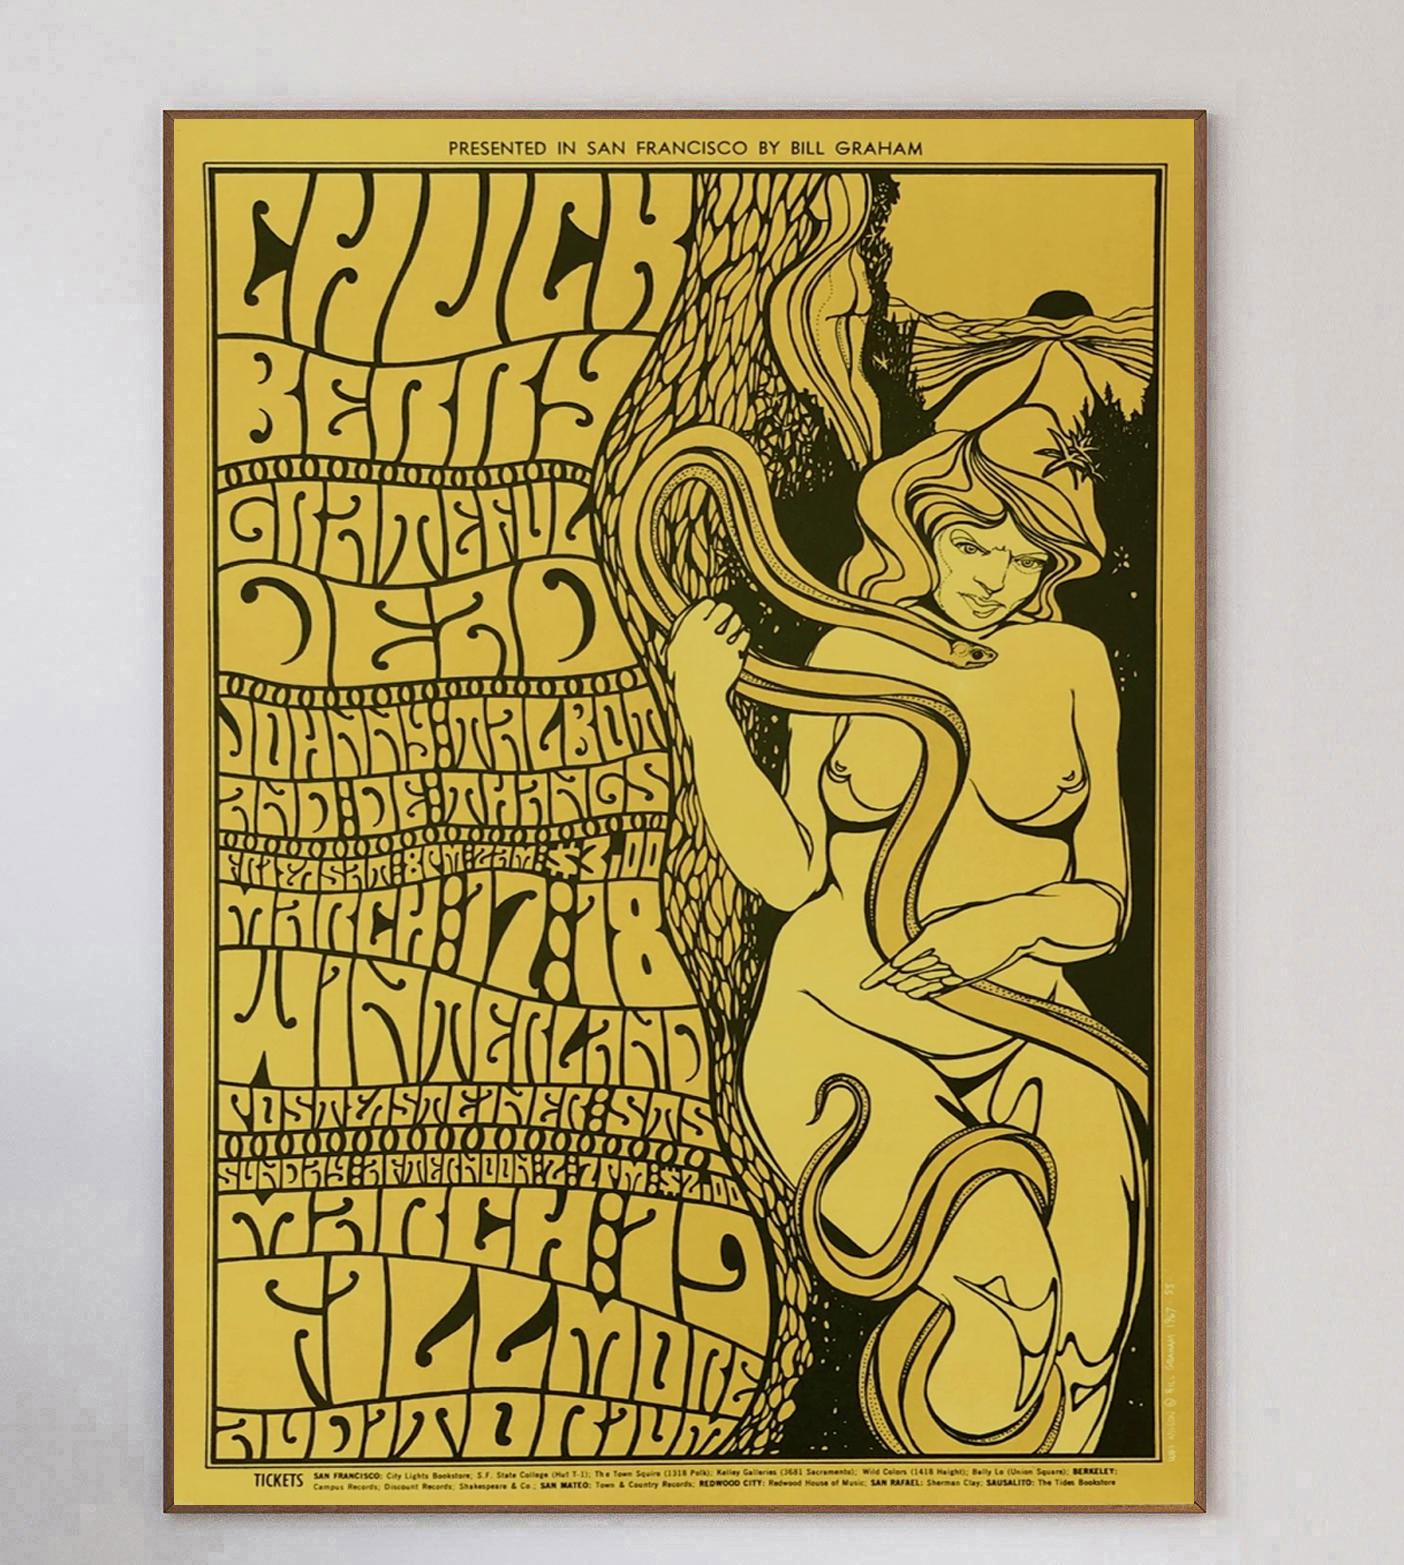 Designed by the iconic concert poster artist Wes Wilson, this beautiful poster was created in 1967 to promote a live concert of Chuck Berry and the Grateful Dead at the world famous Fillmore Auditorium in San Francisco. Bill Graham events such as